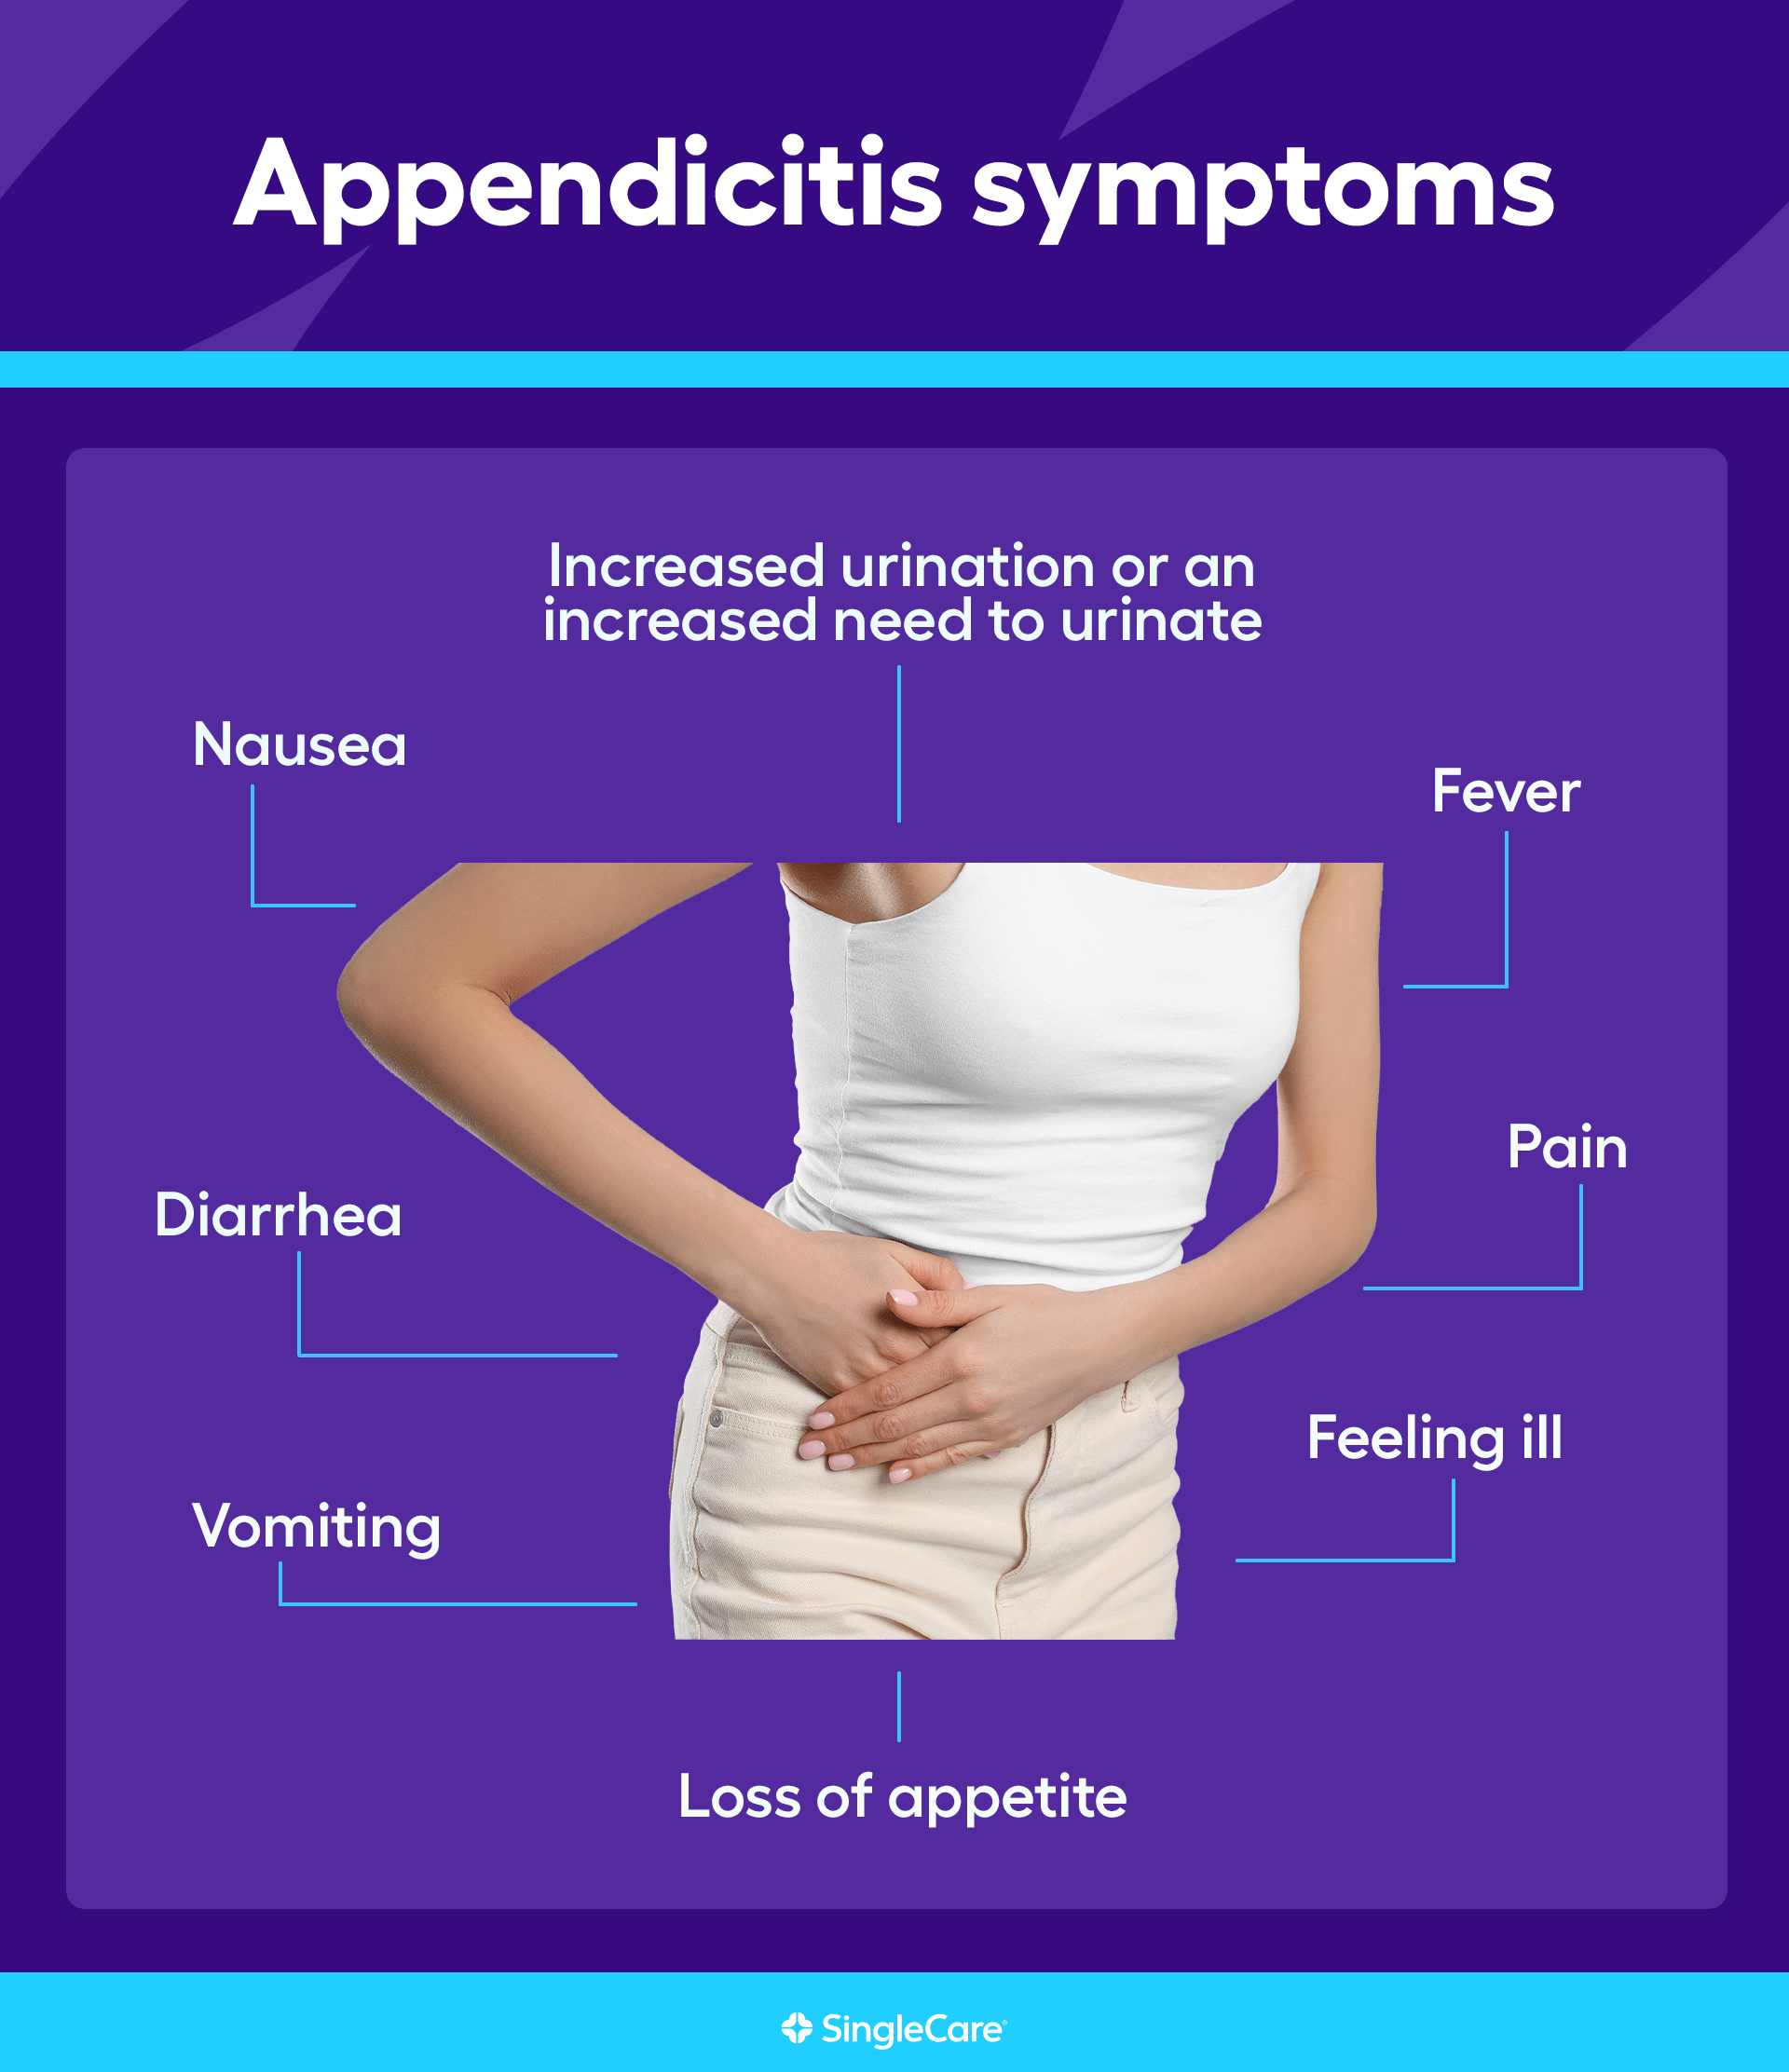 What are the early signs of appendicitis?